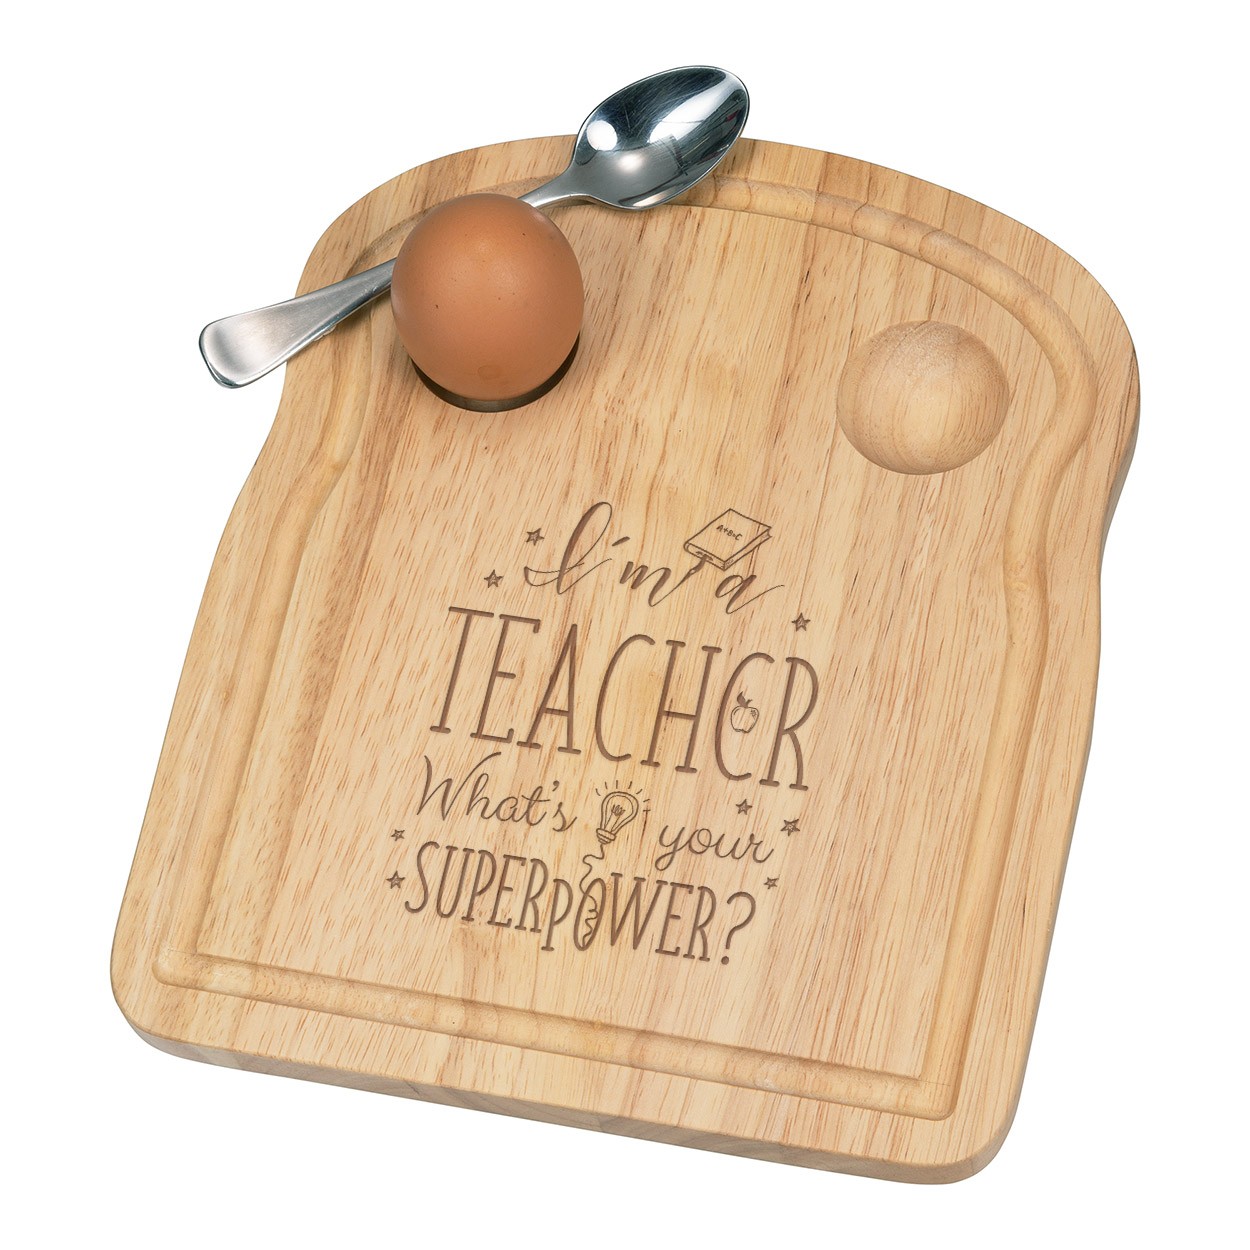 I'm A Teacher What's Your Superpower Breakfast Dippy Egg Cup Board Wooden